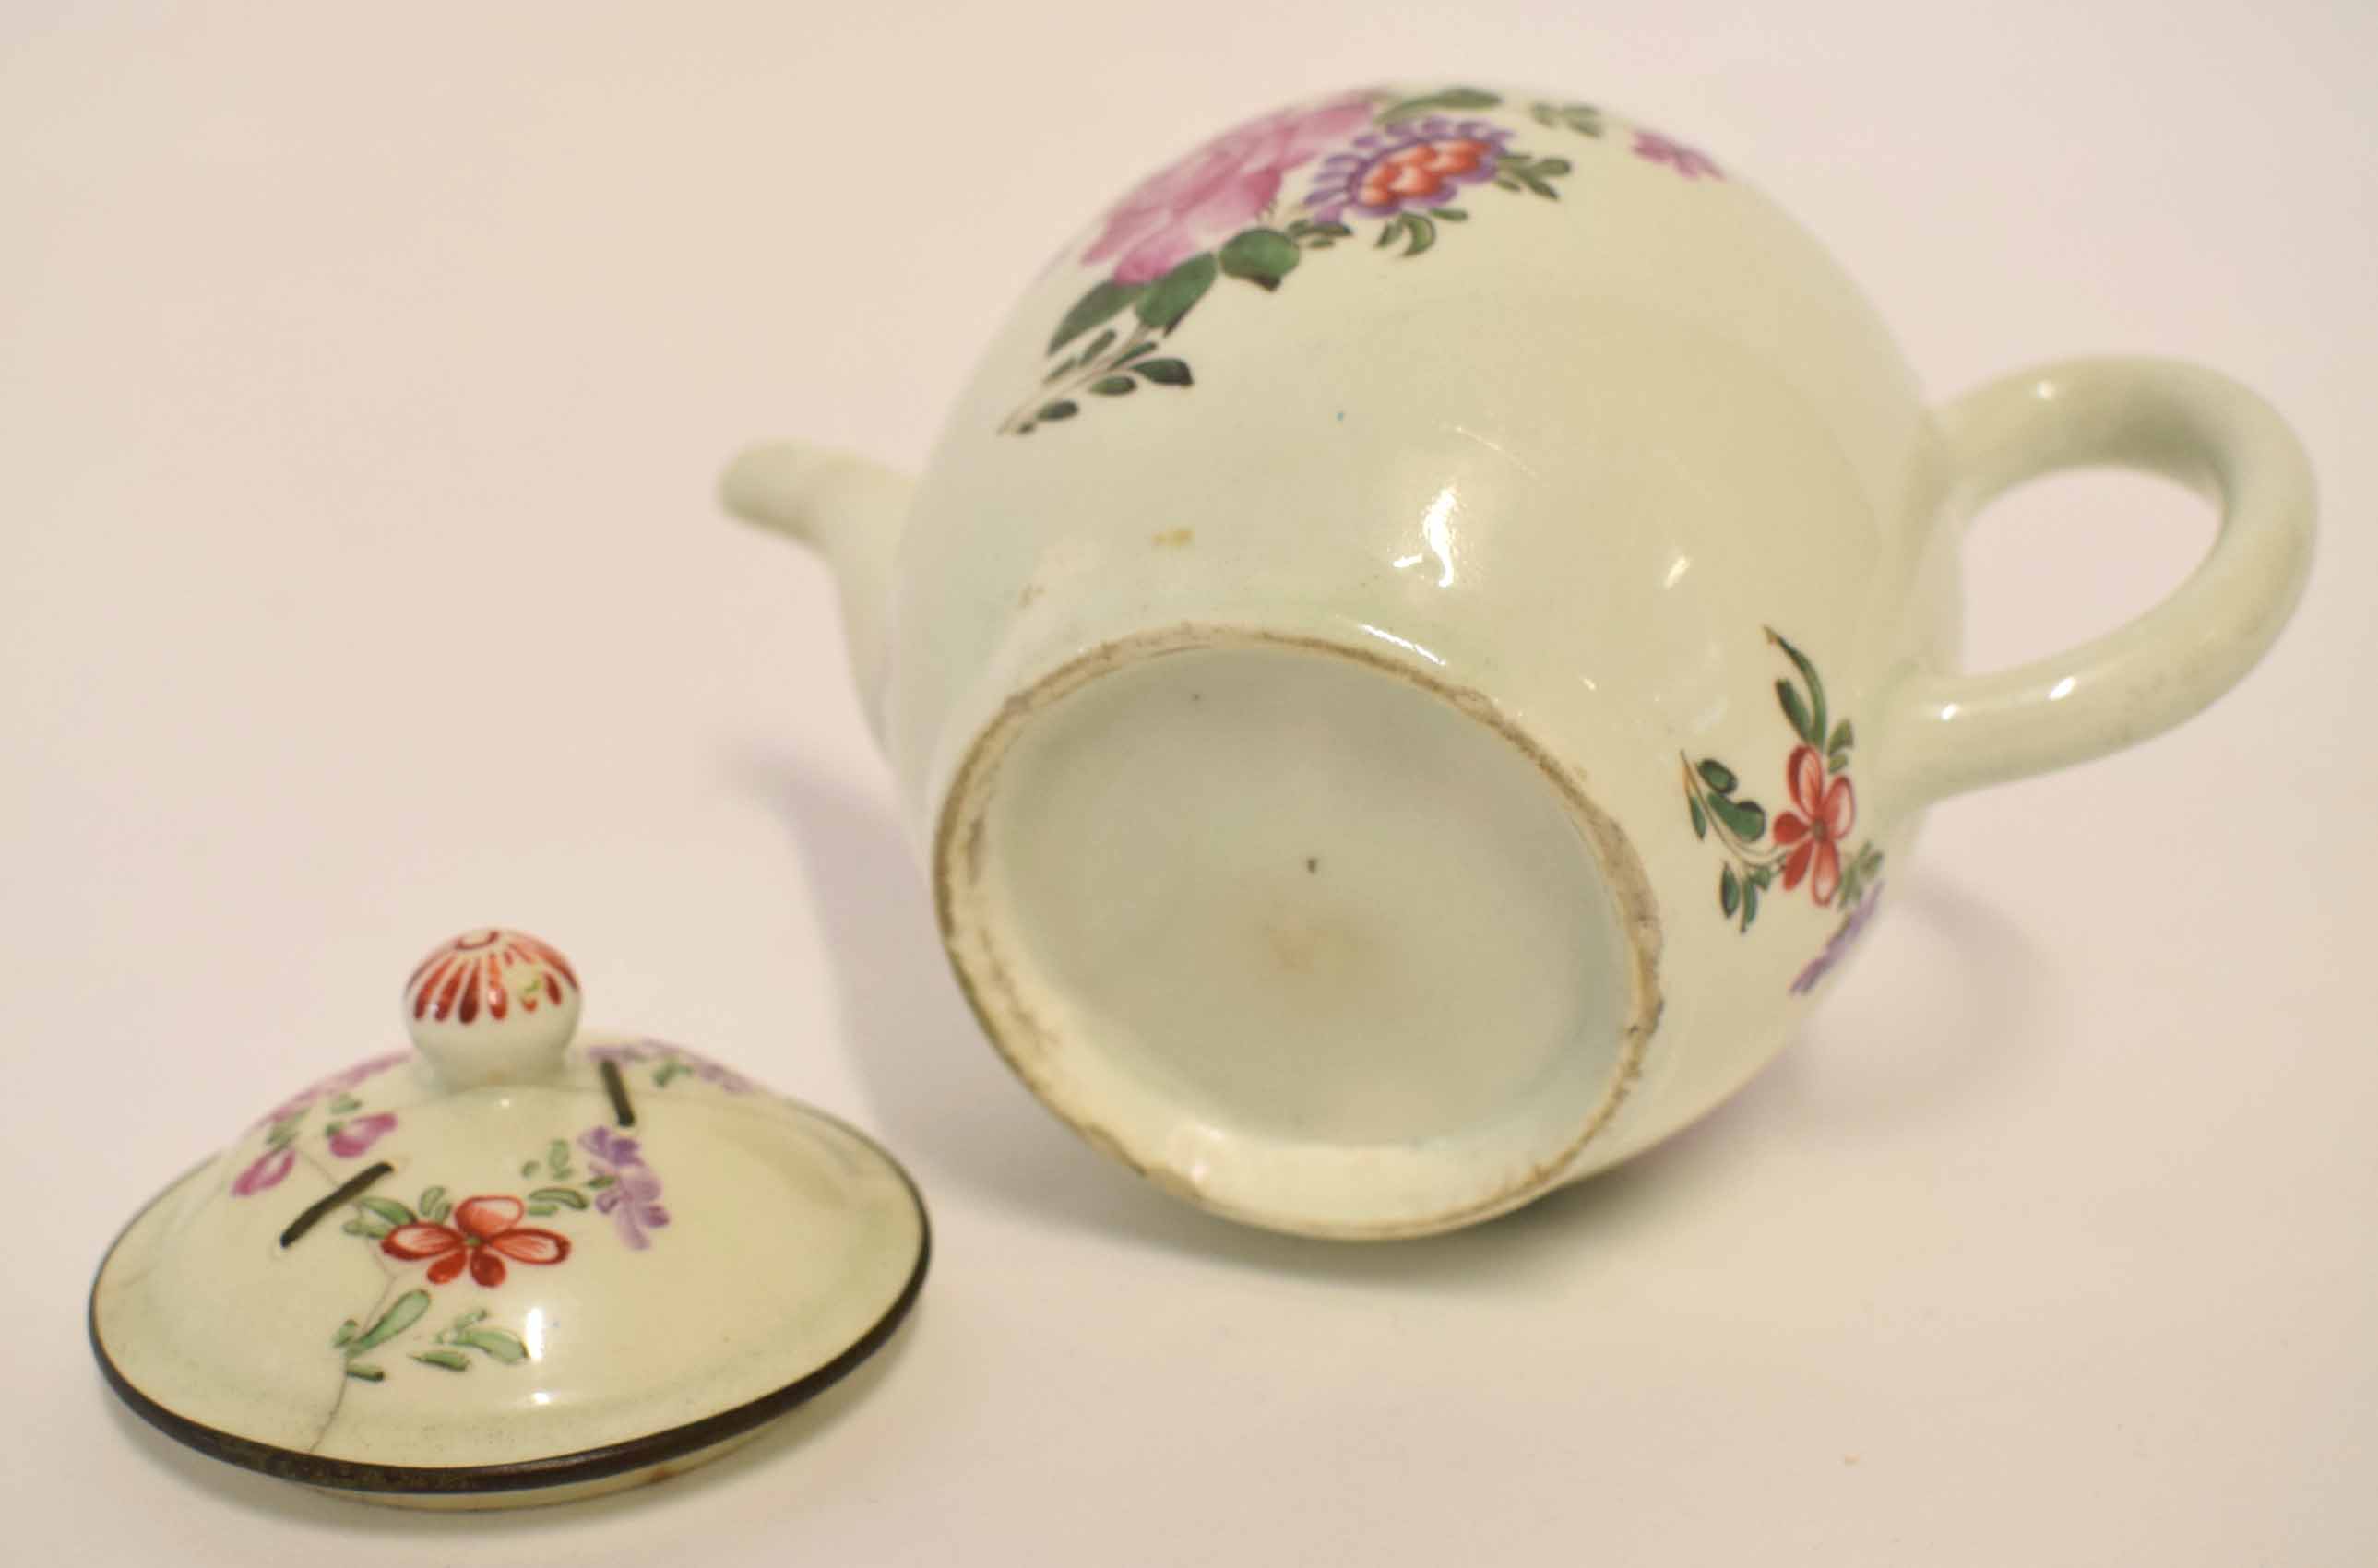 Lowestoft teapot, circa 1780, decorated in Compagnie-des-Indes style, the cover with button knop, - Image 2 of 2